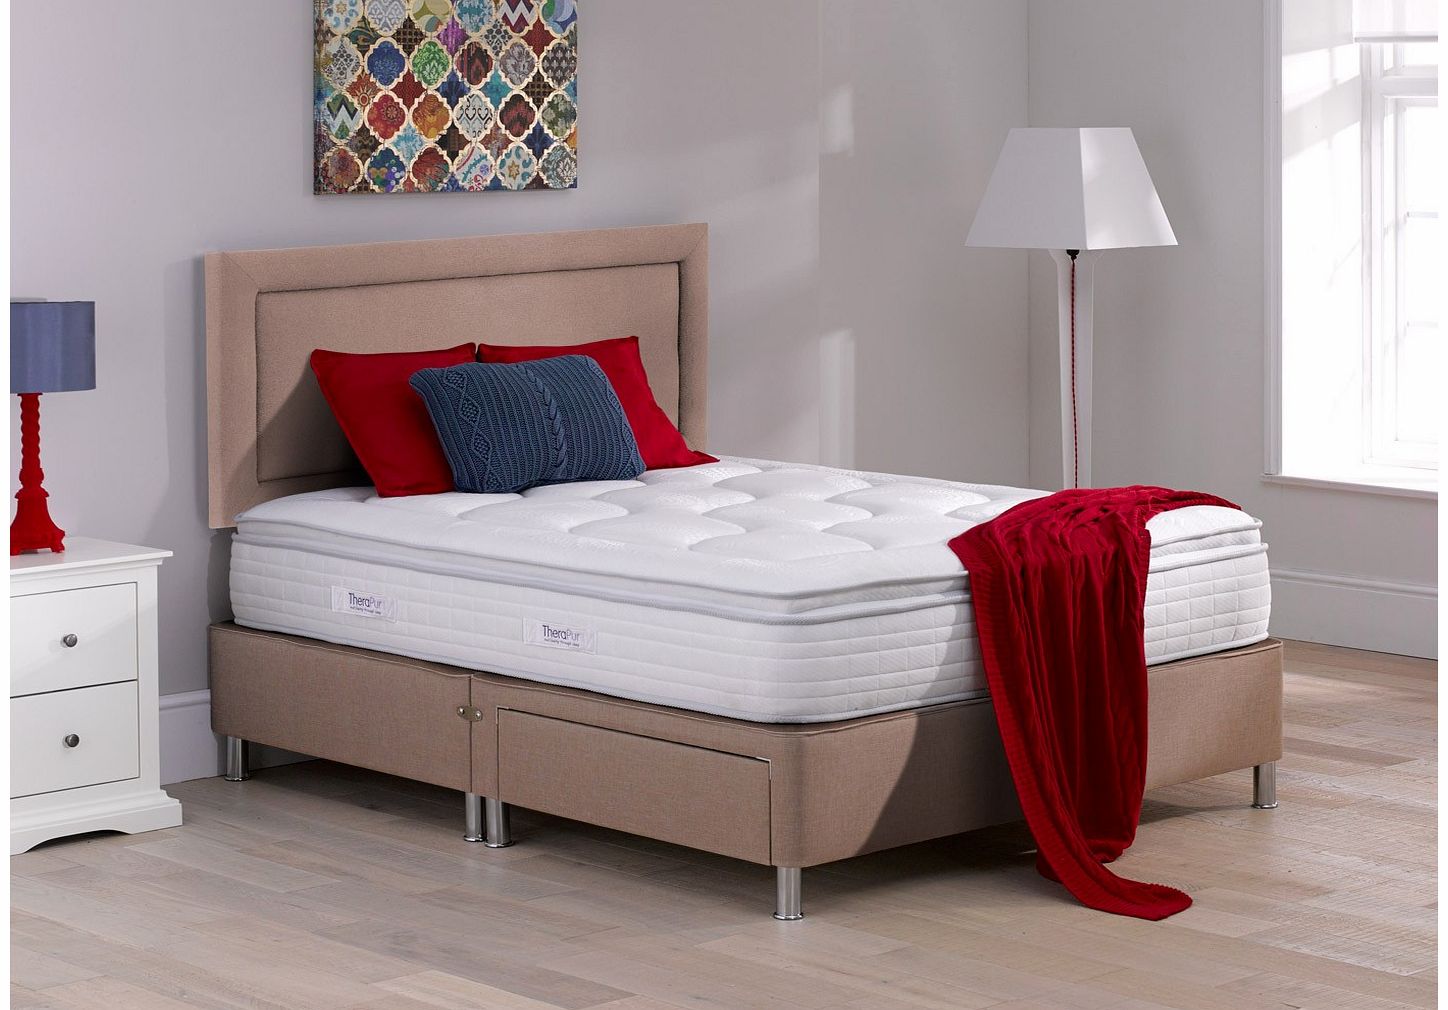 4`6 Double Therapur Vitality Divan Bed With Legs - Medium